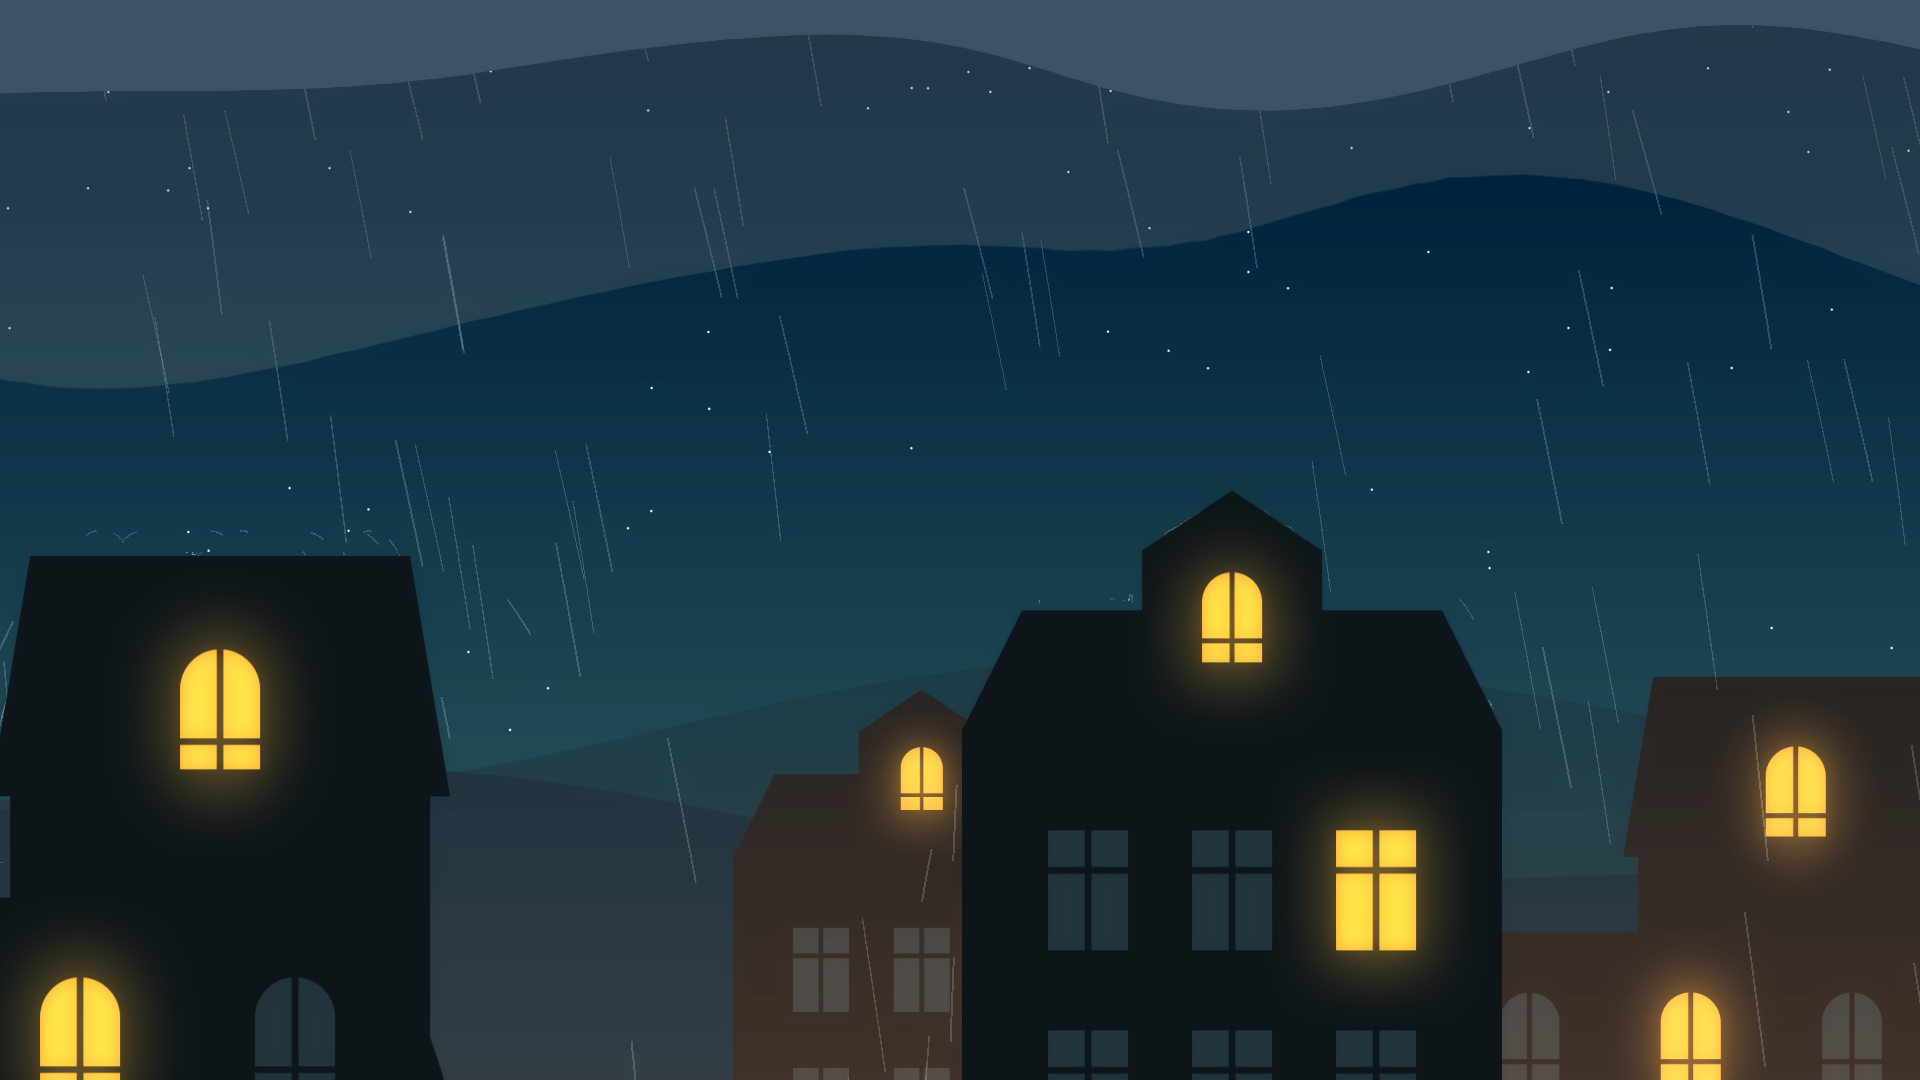 A demo showing the new 2D particles: a rainy night scene